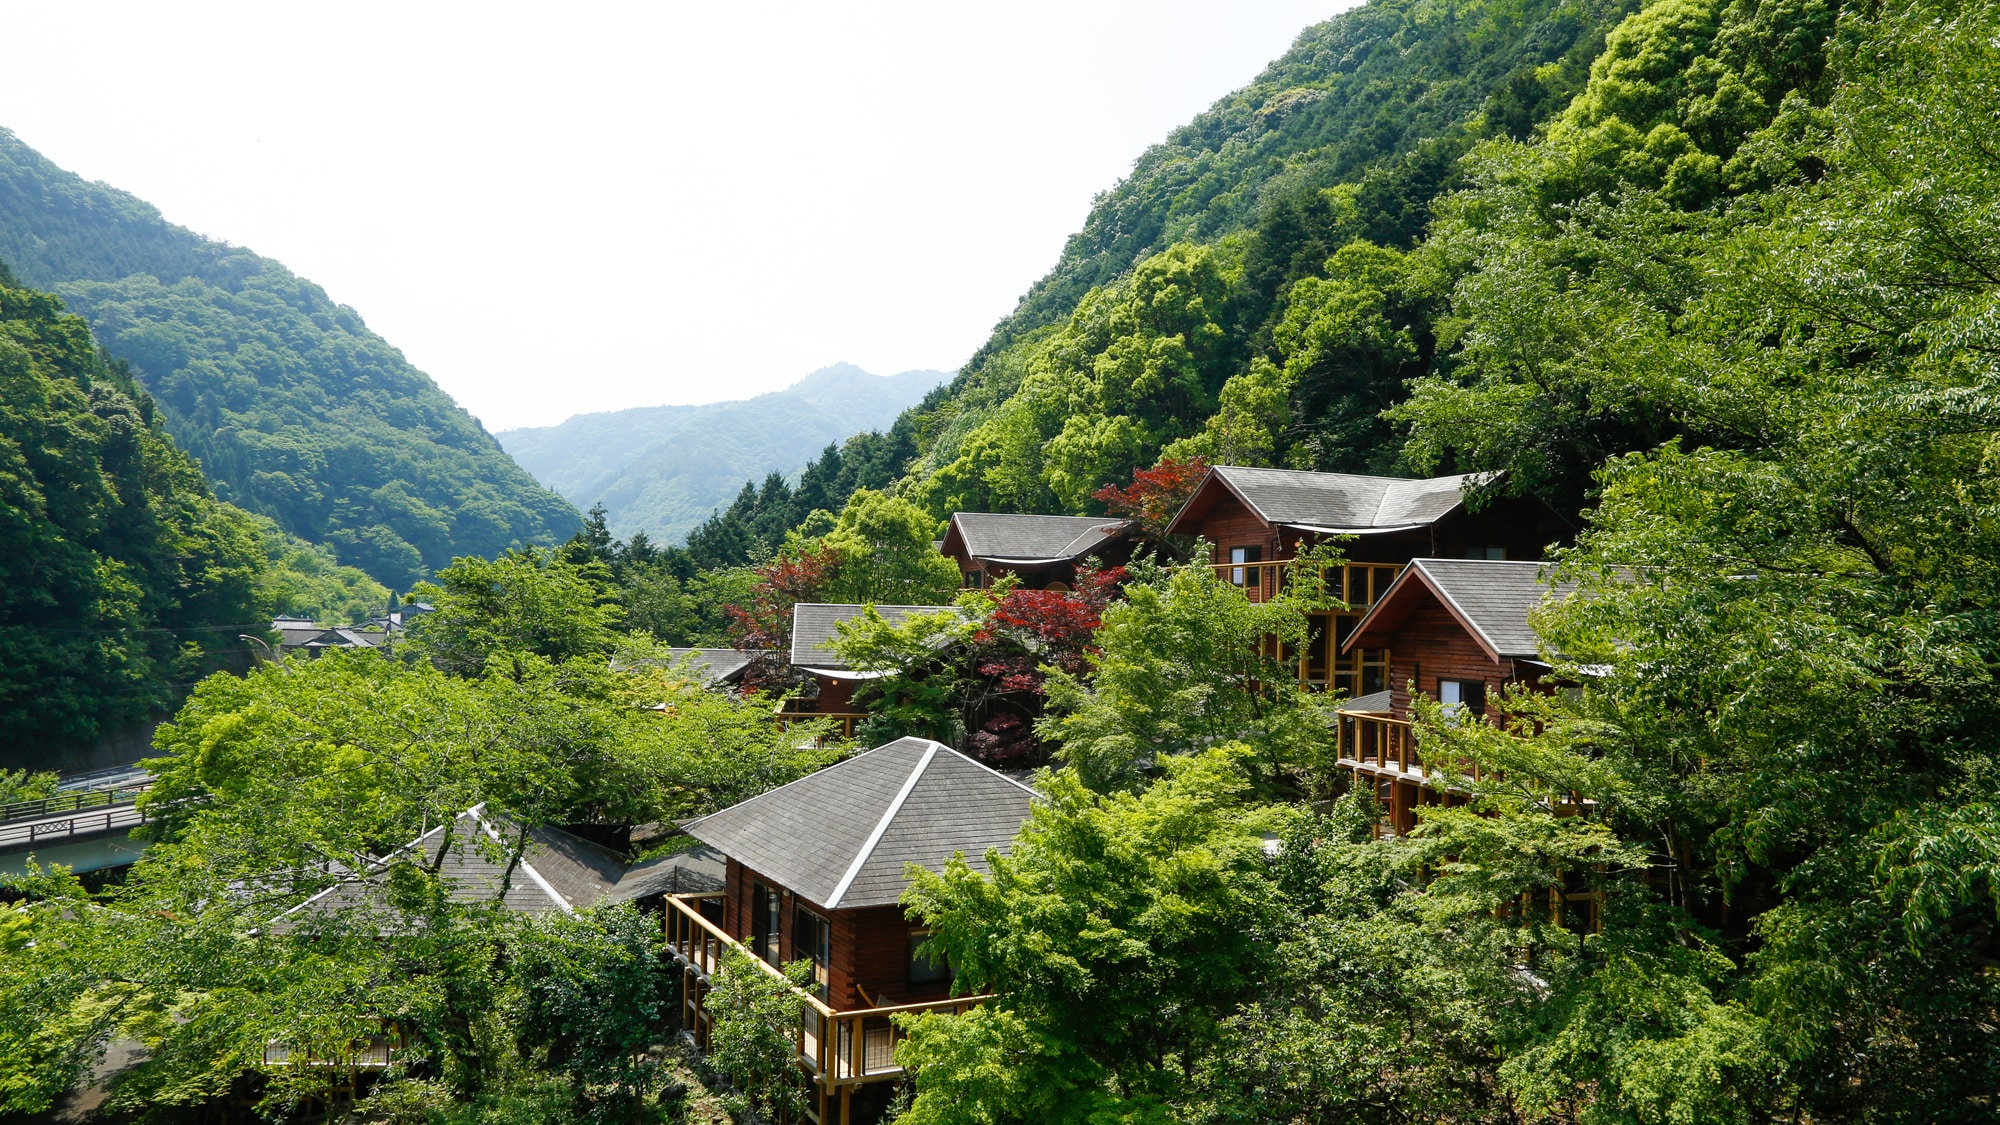 Taking advantage of the slopes of the mountains, the scent of the mountains reaches the spacious terrace, Satoyama Hutte.